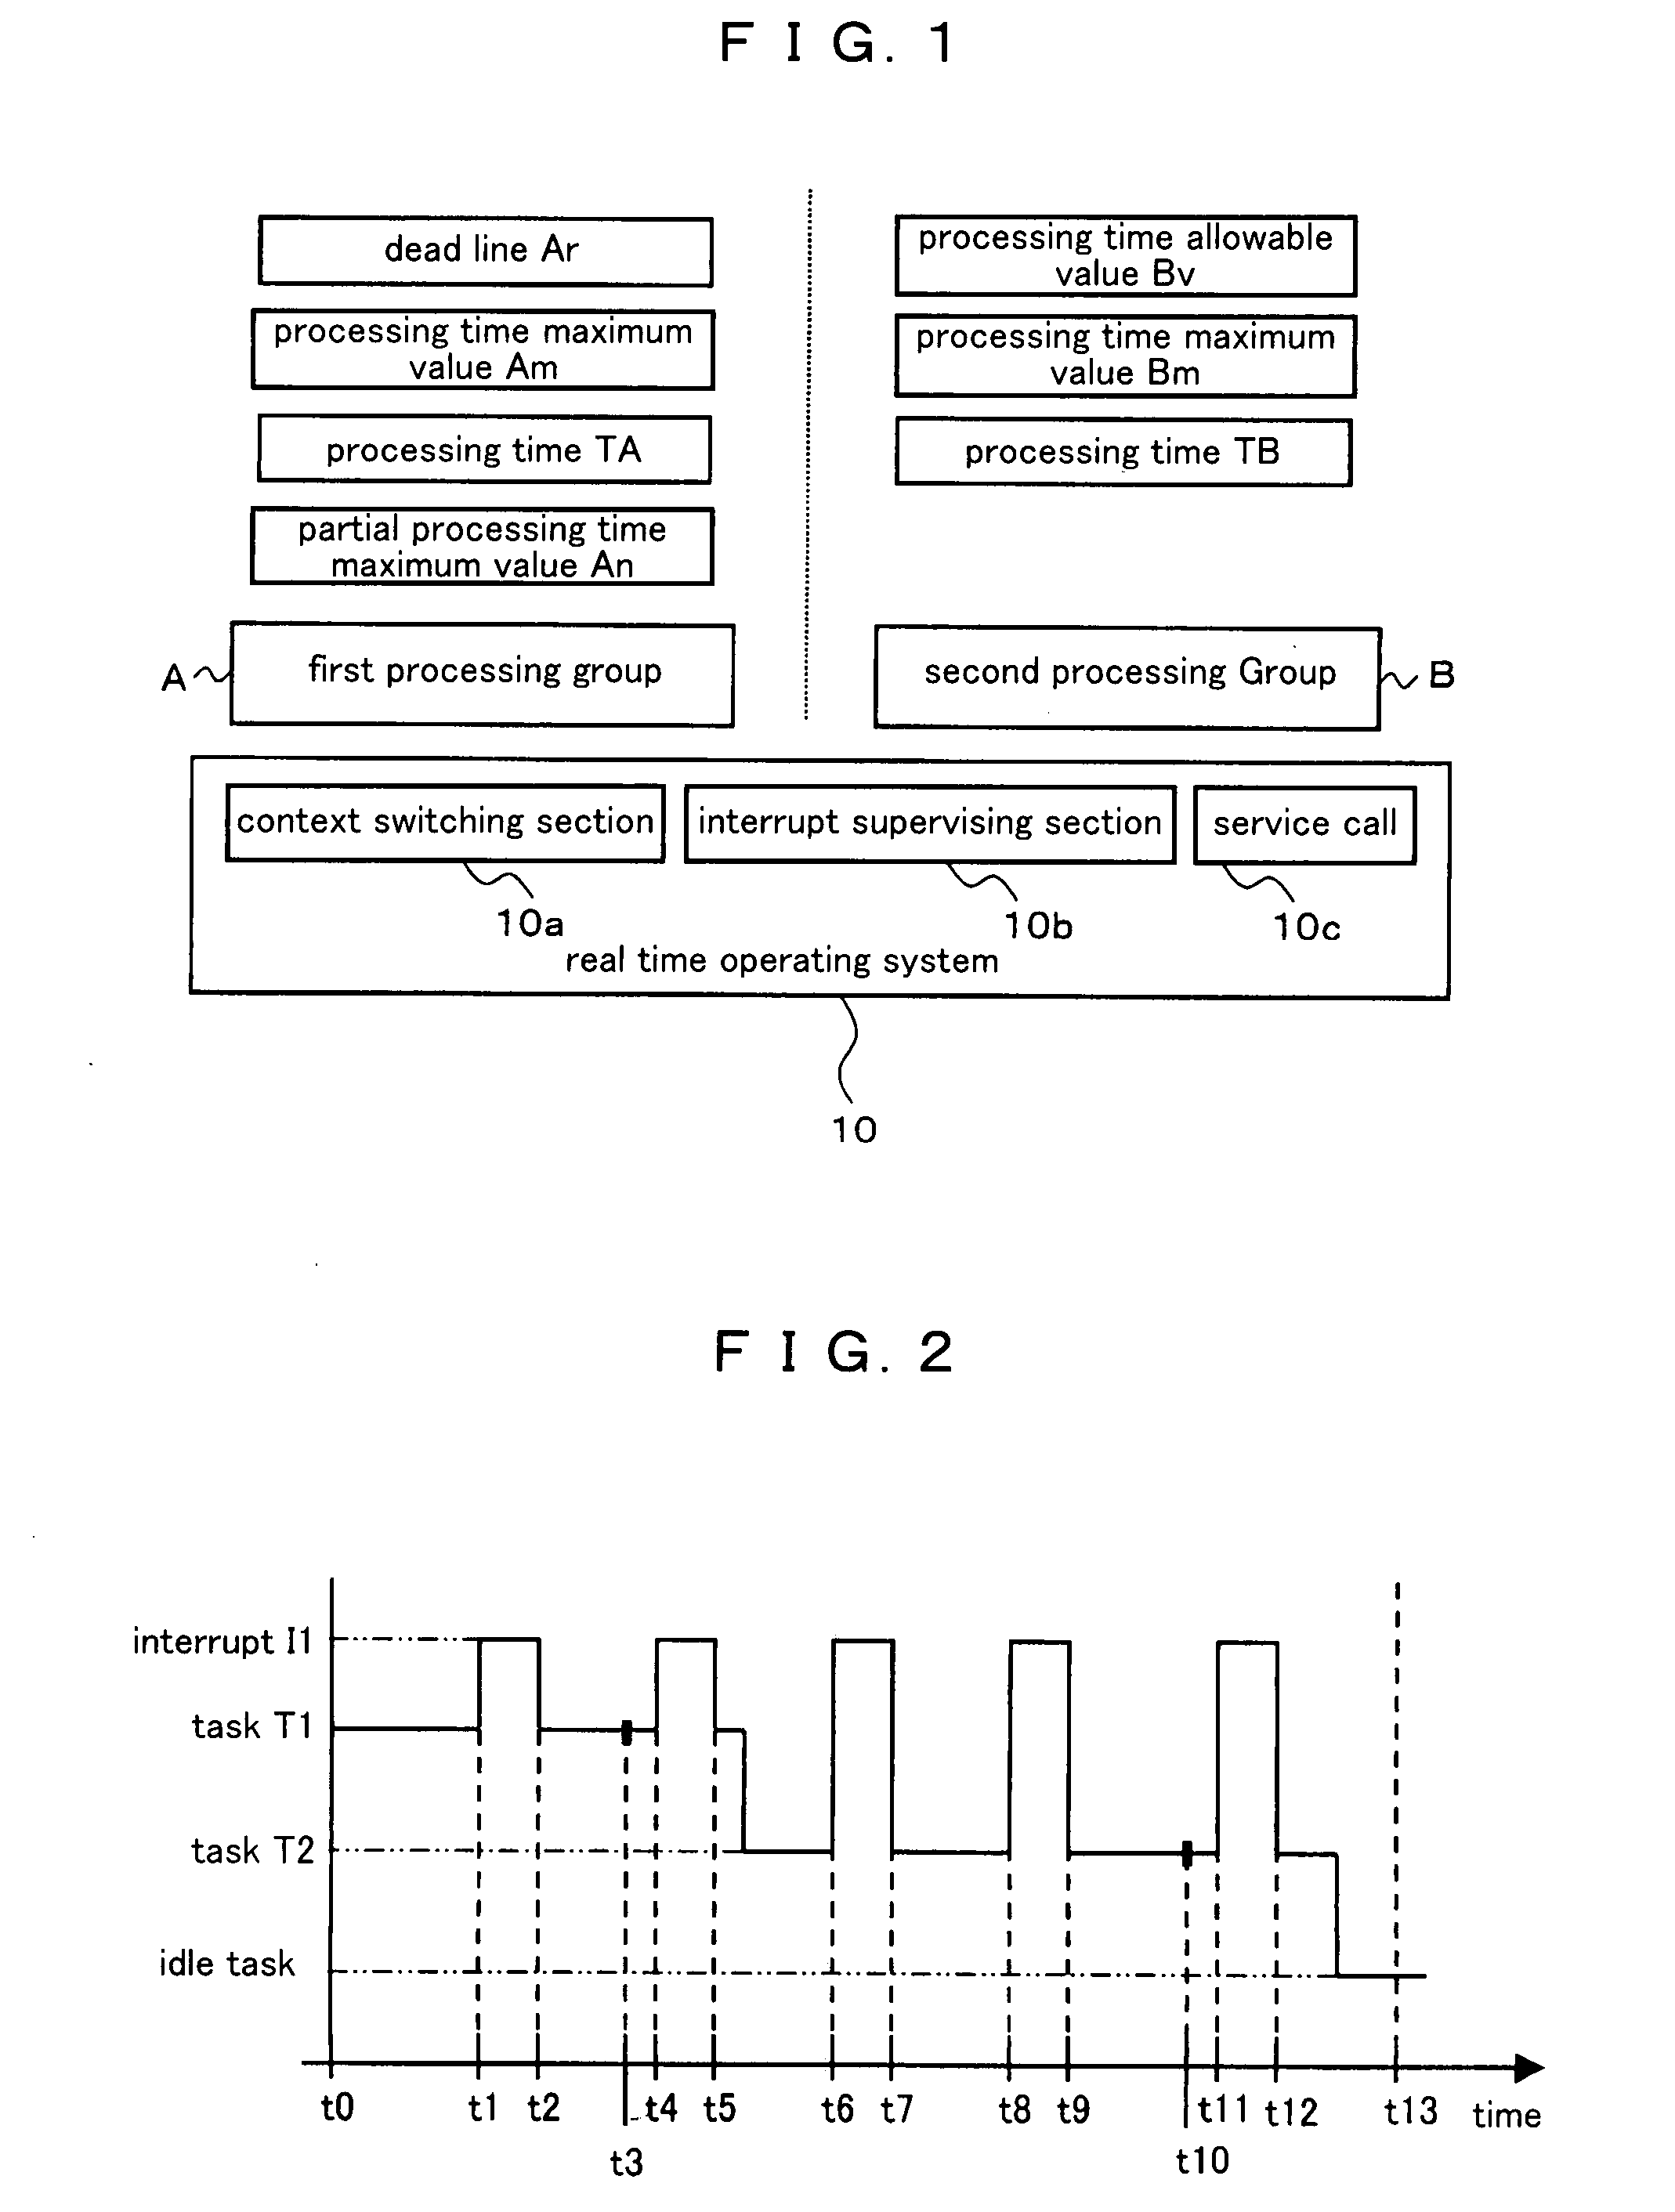 Method of processing time distribution in real time operating system